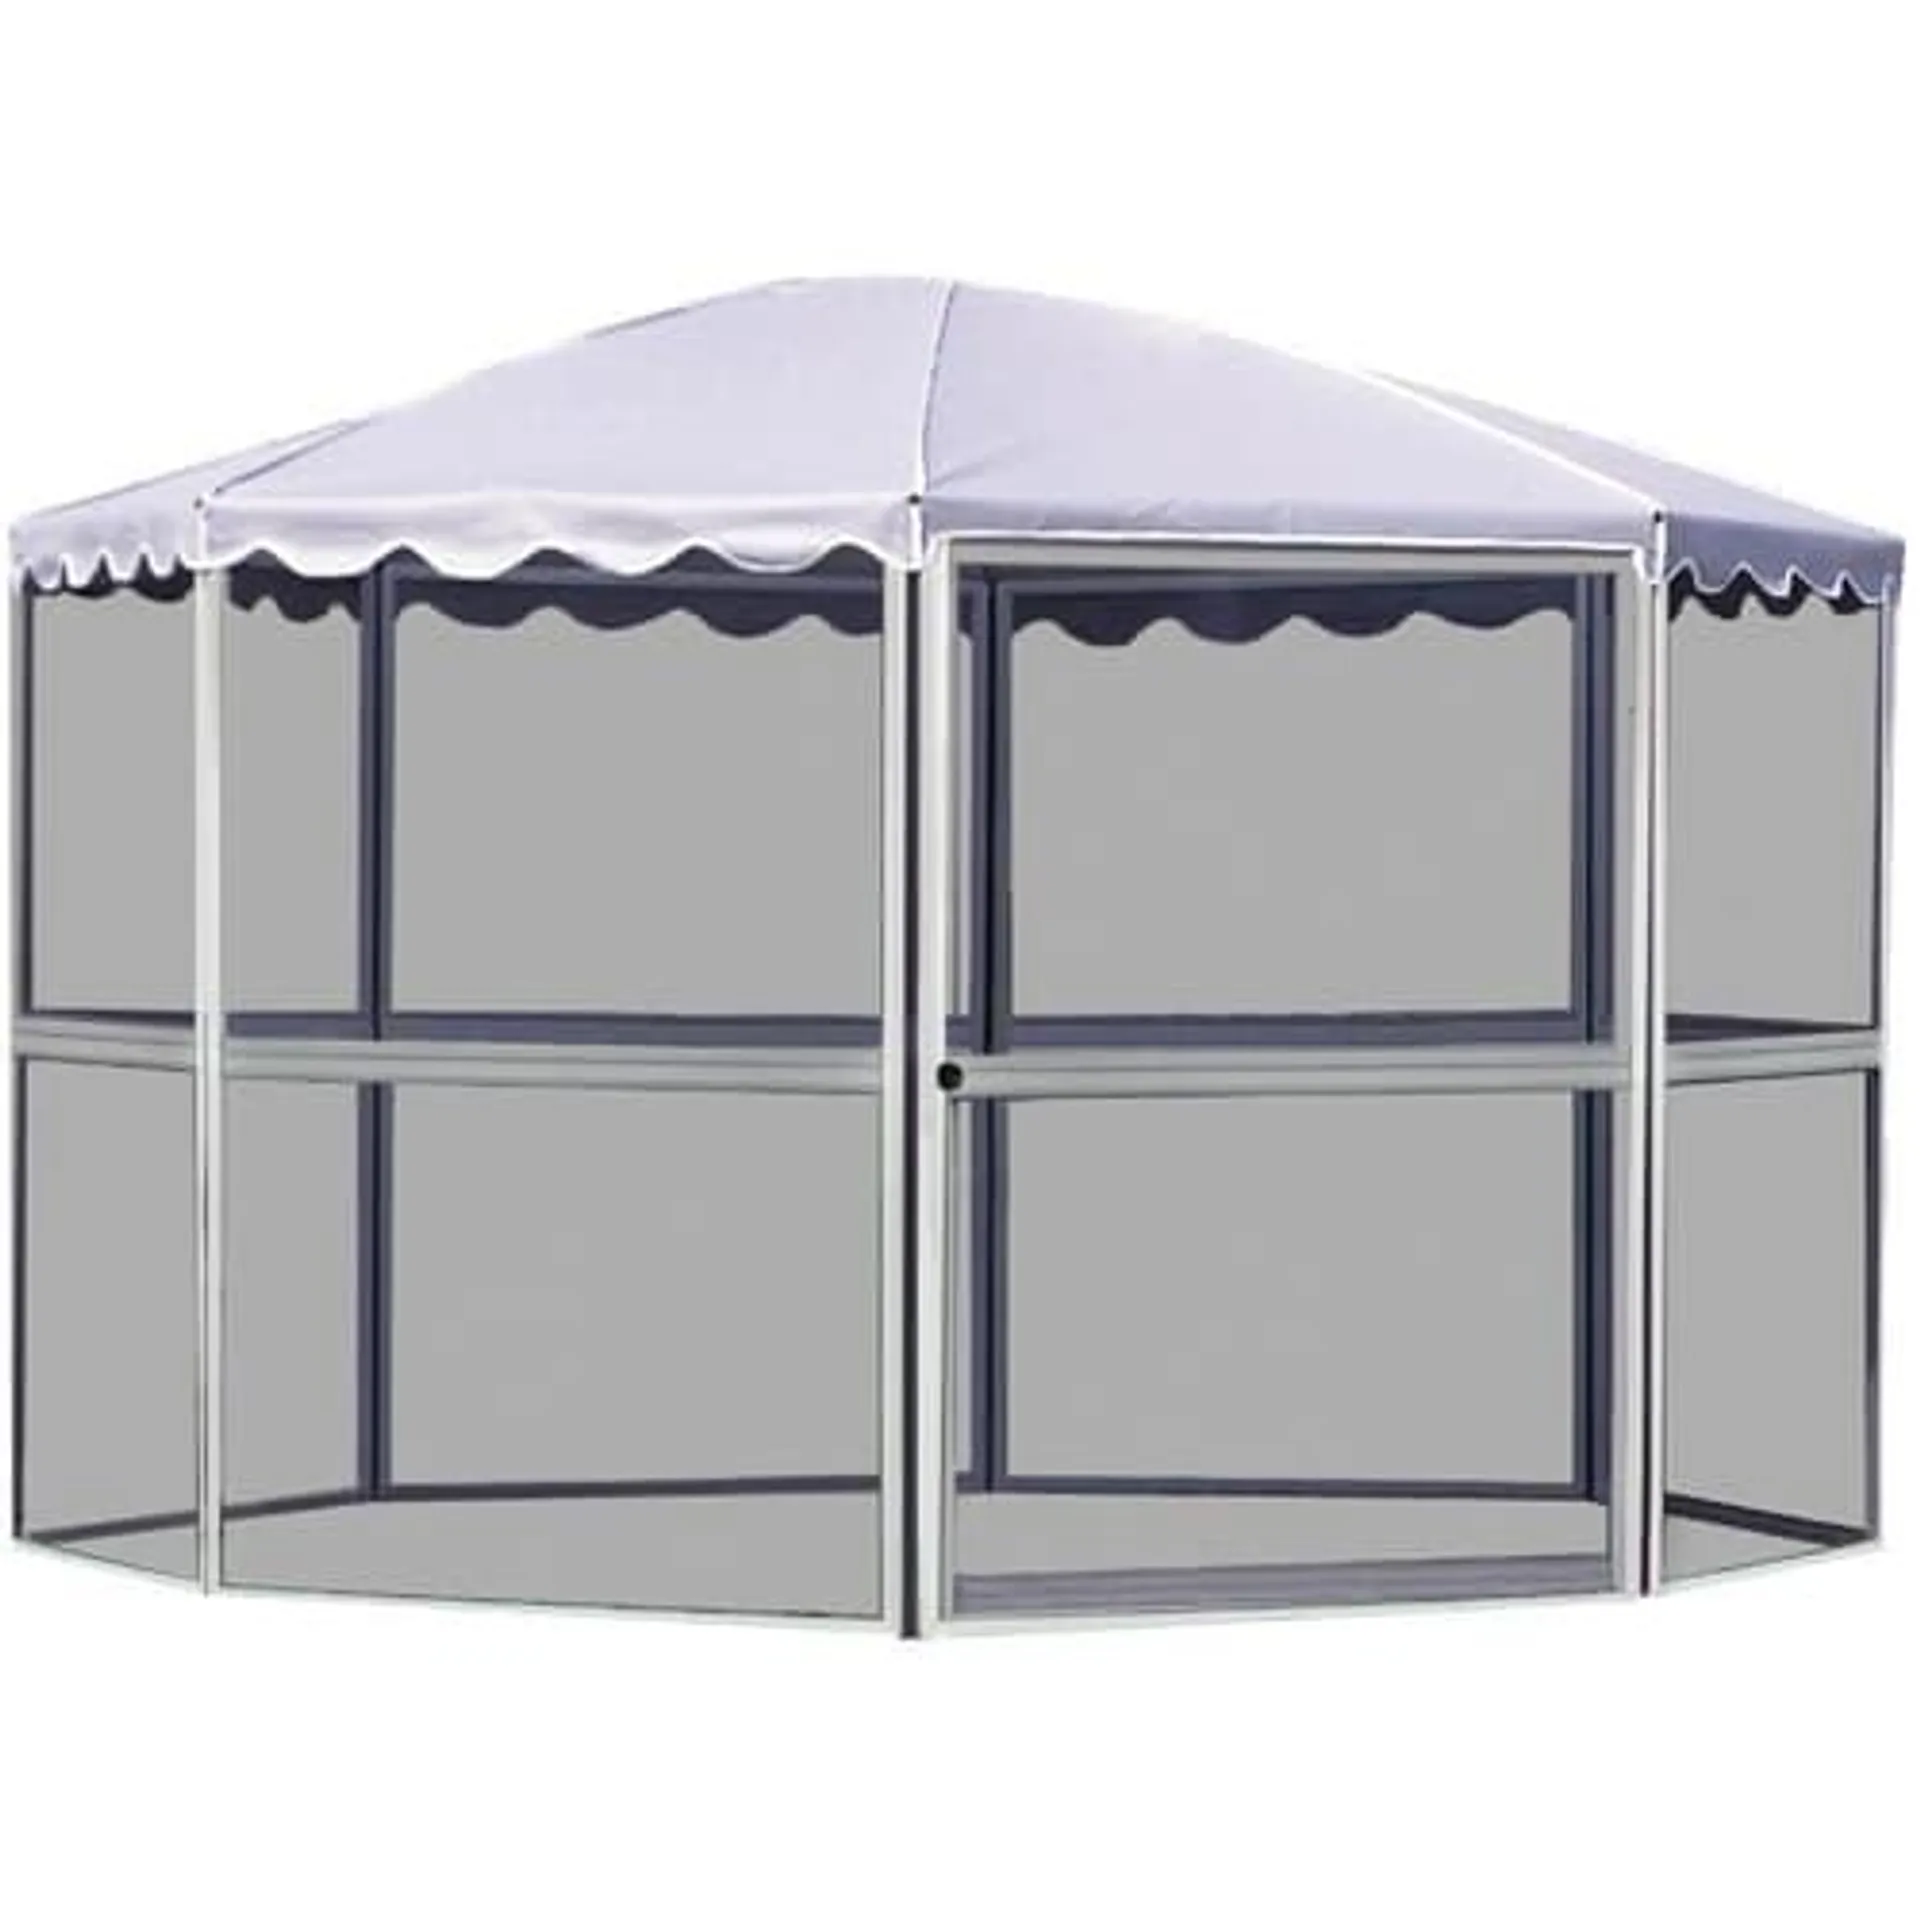 8 Panel Round Screenhouse - White with Grey Roof, 90 sq. ft.